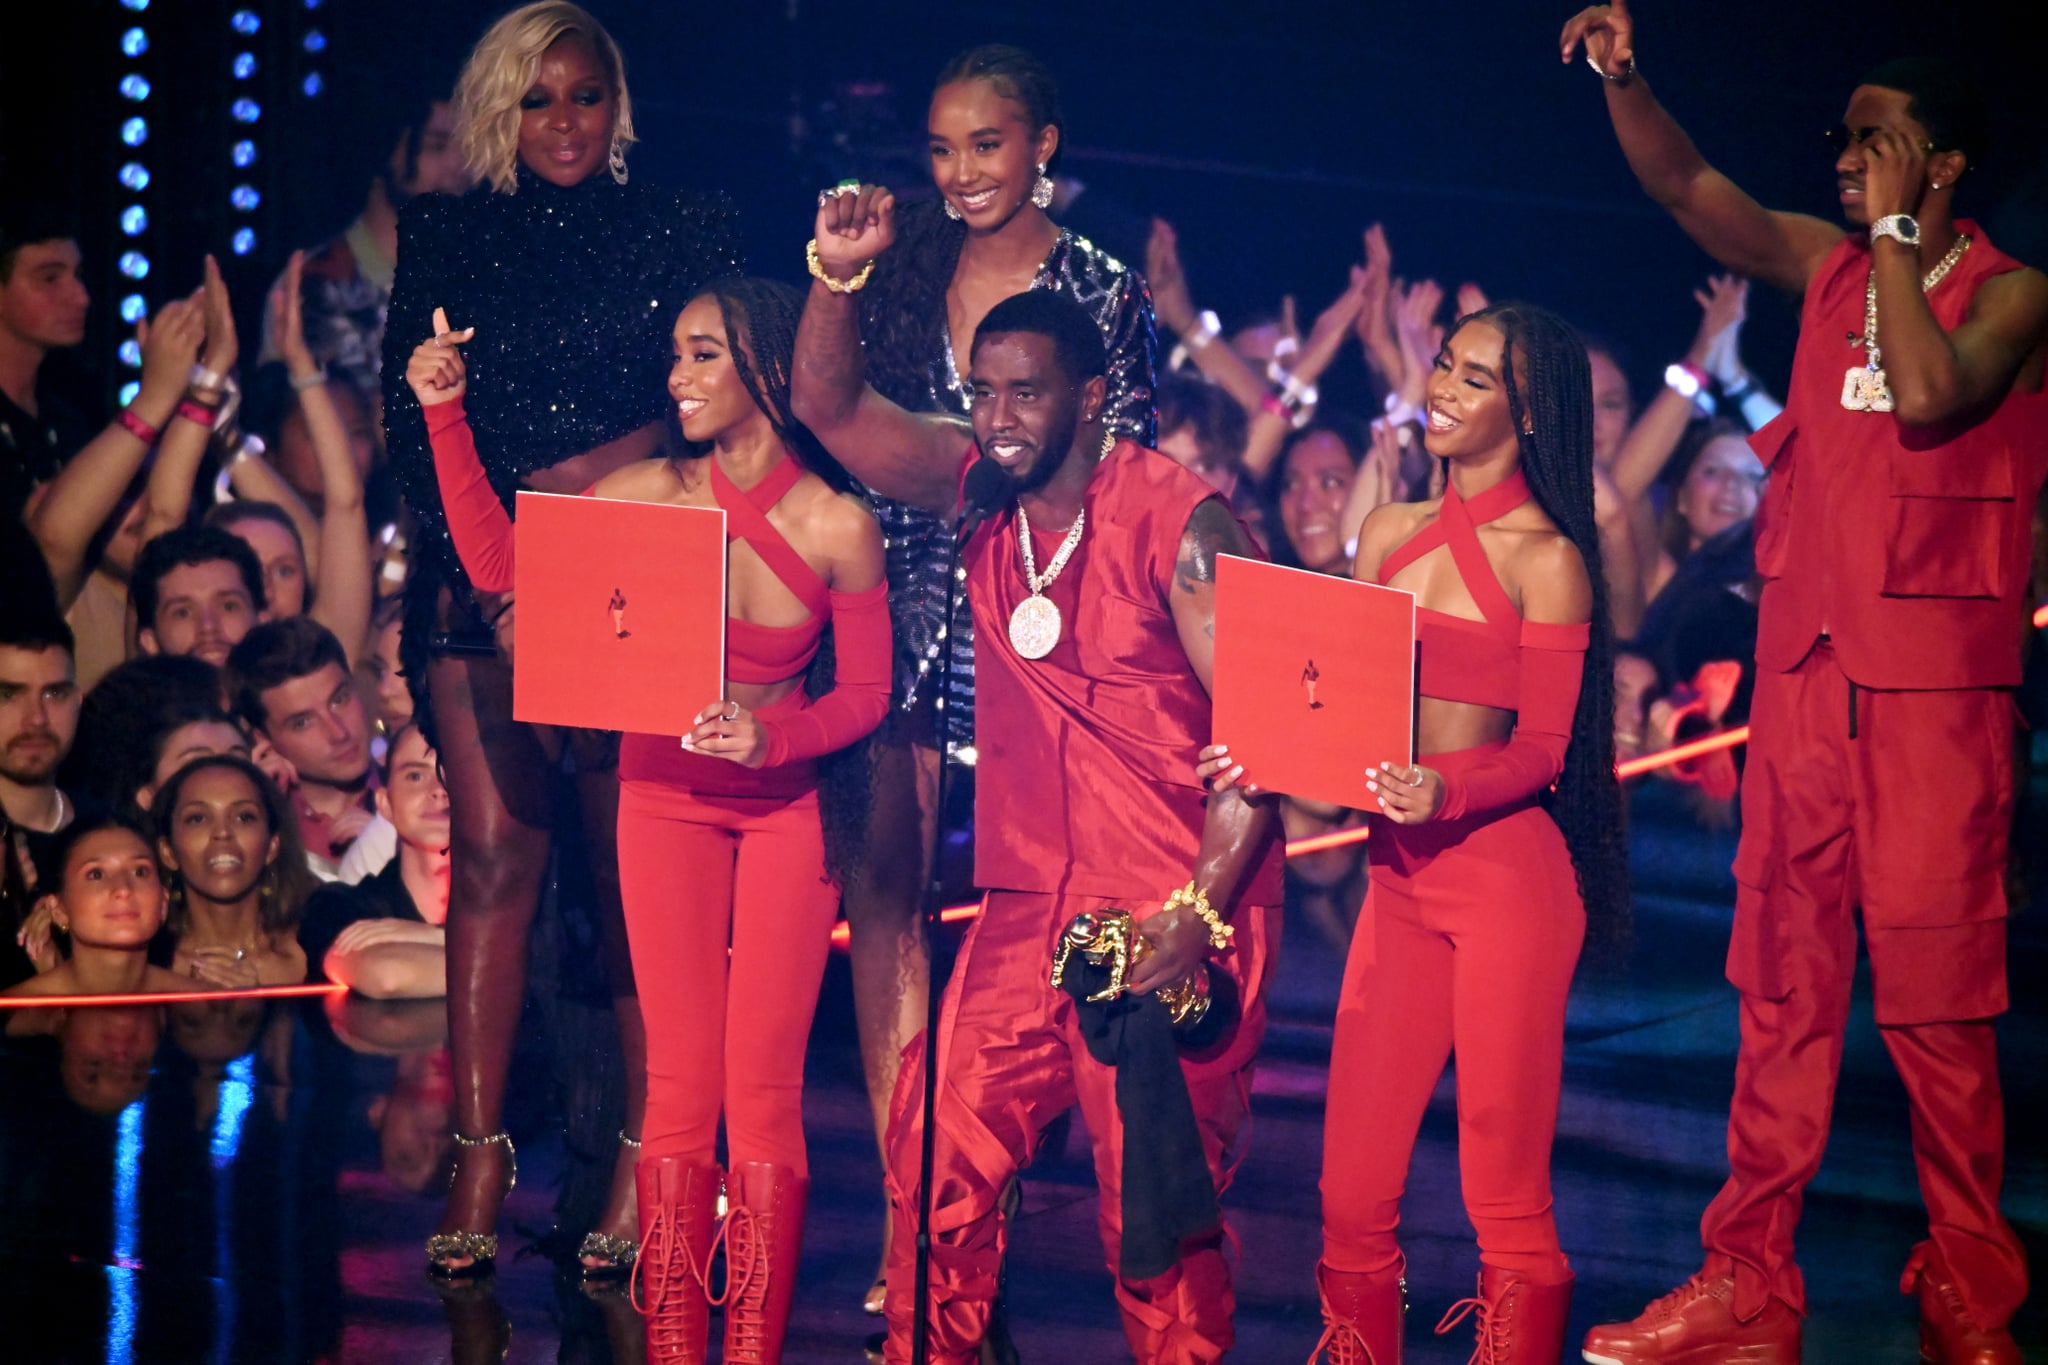 NEWARK, NEW JERSEY - SEPTEMBER 12: Diddy accepts the Global Icon Award onstage during the 2023 MTV Video Music Awards at Prudential Center on September 12, 2023 in Newark, New Jersey. (Photo by Noam Galai/Getty Images for MTV)